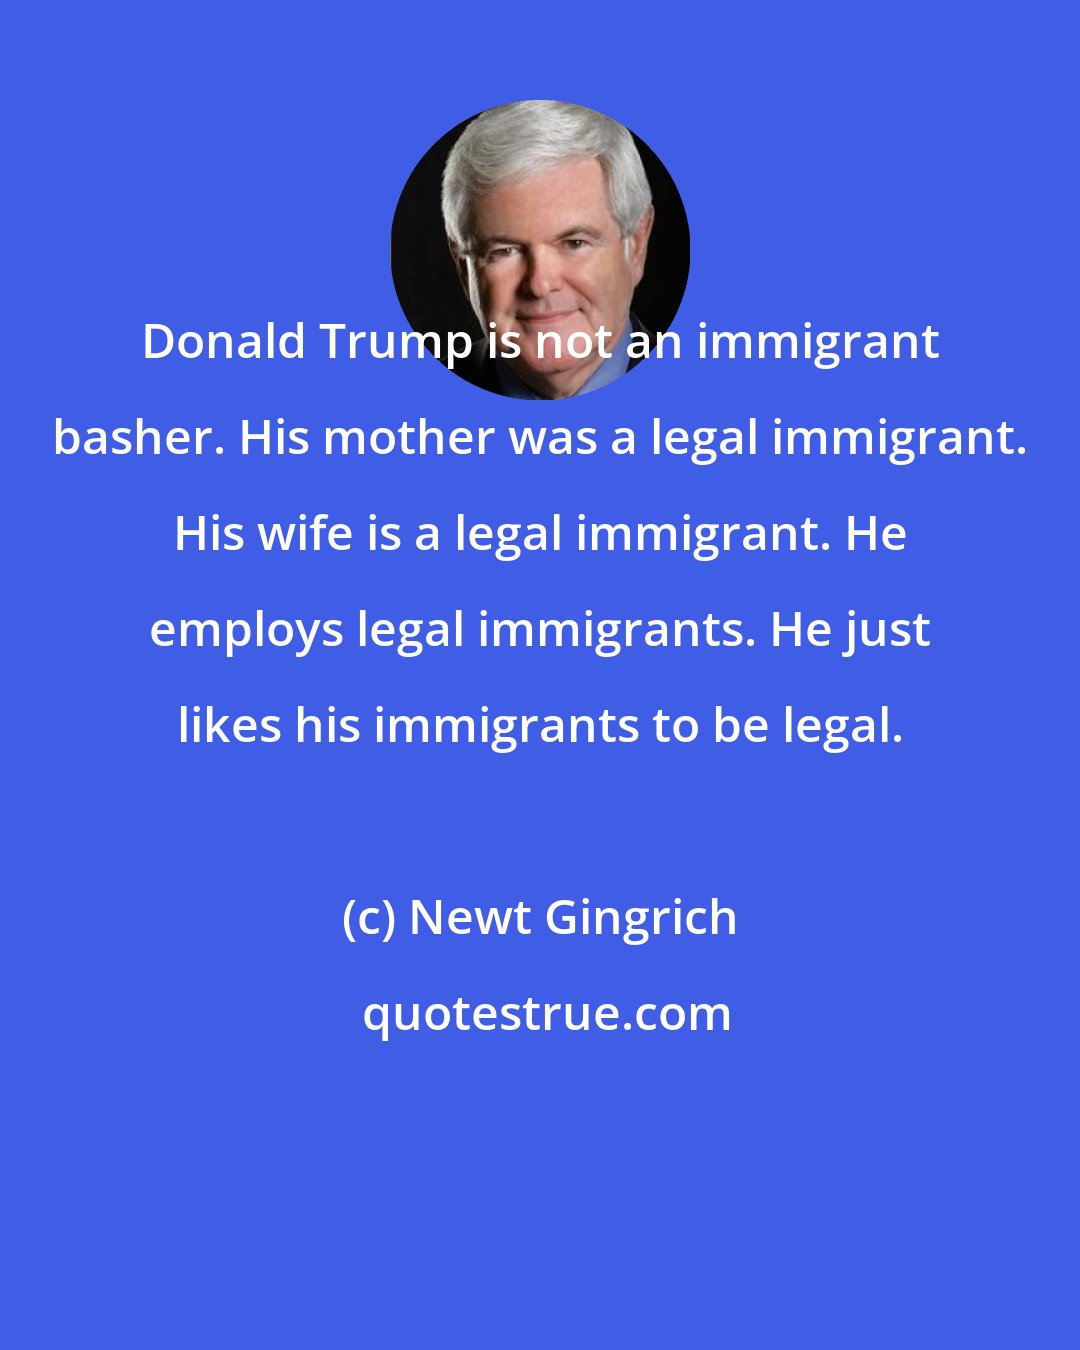 Newt Gingrich: Donald Trump is not an immigrant basher. His mother was a legal immigrant. His wife is a legal immigrant. He employs legal immigrants. He just likes his immigrants to be legal.